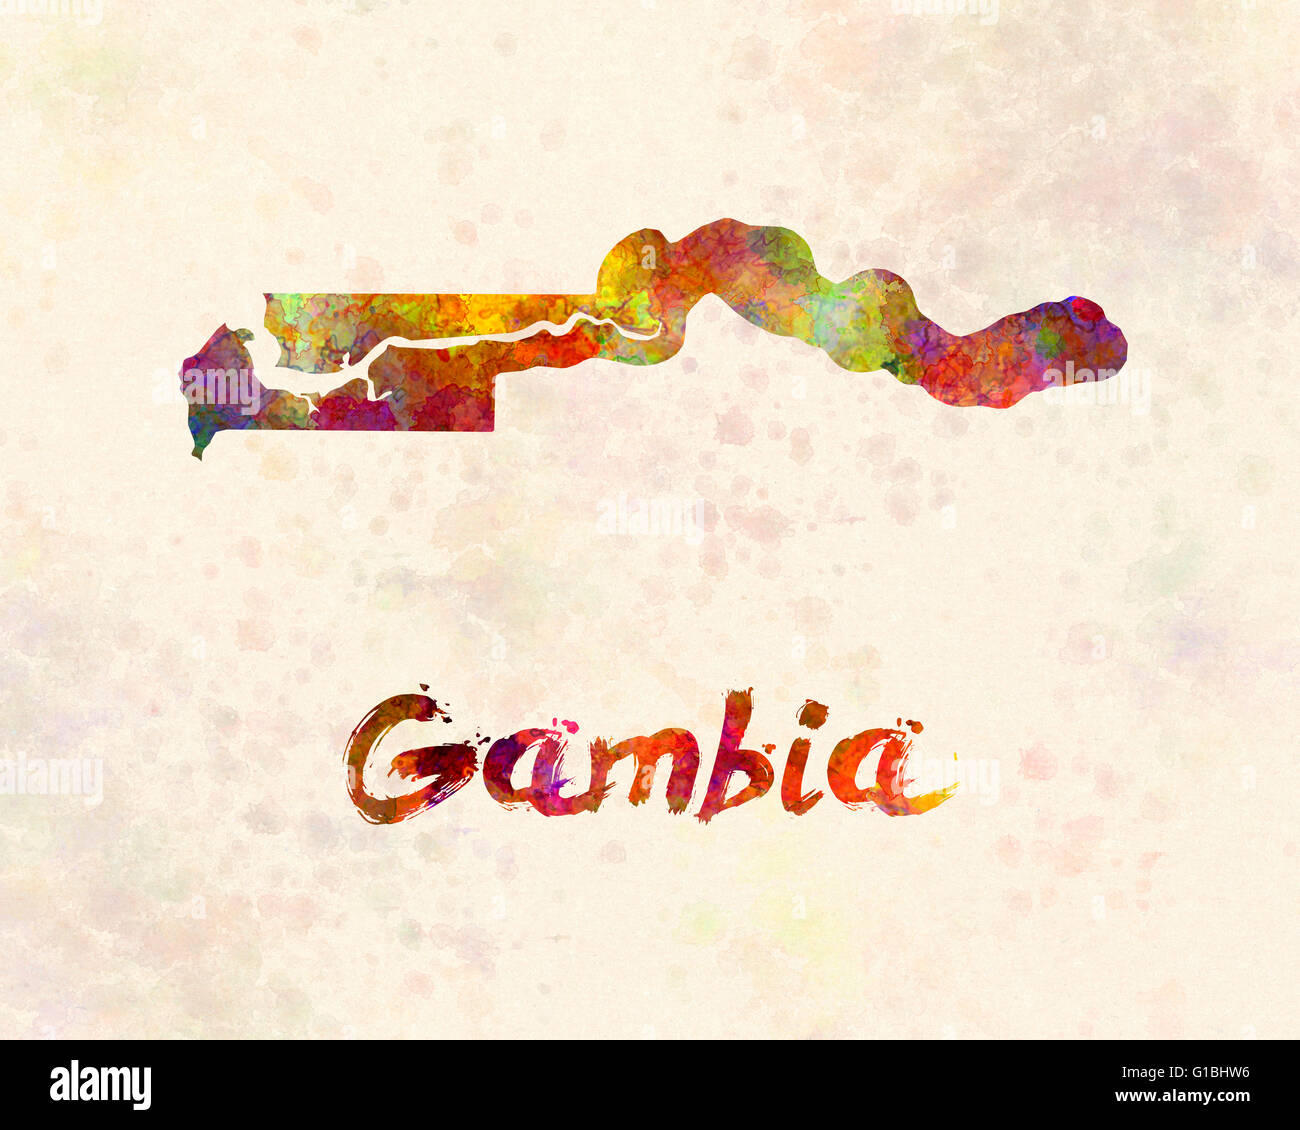 Gambia  in watercolor Stock Photo